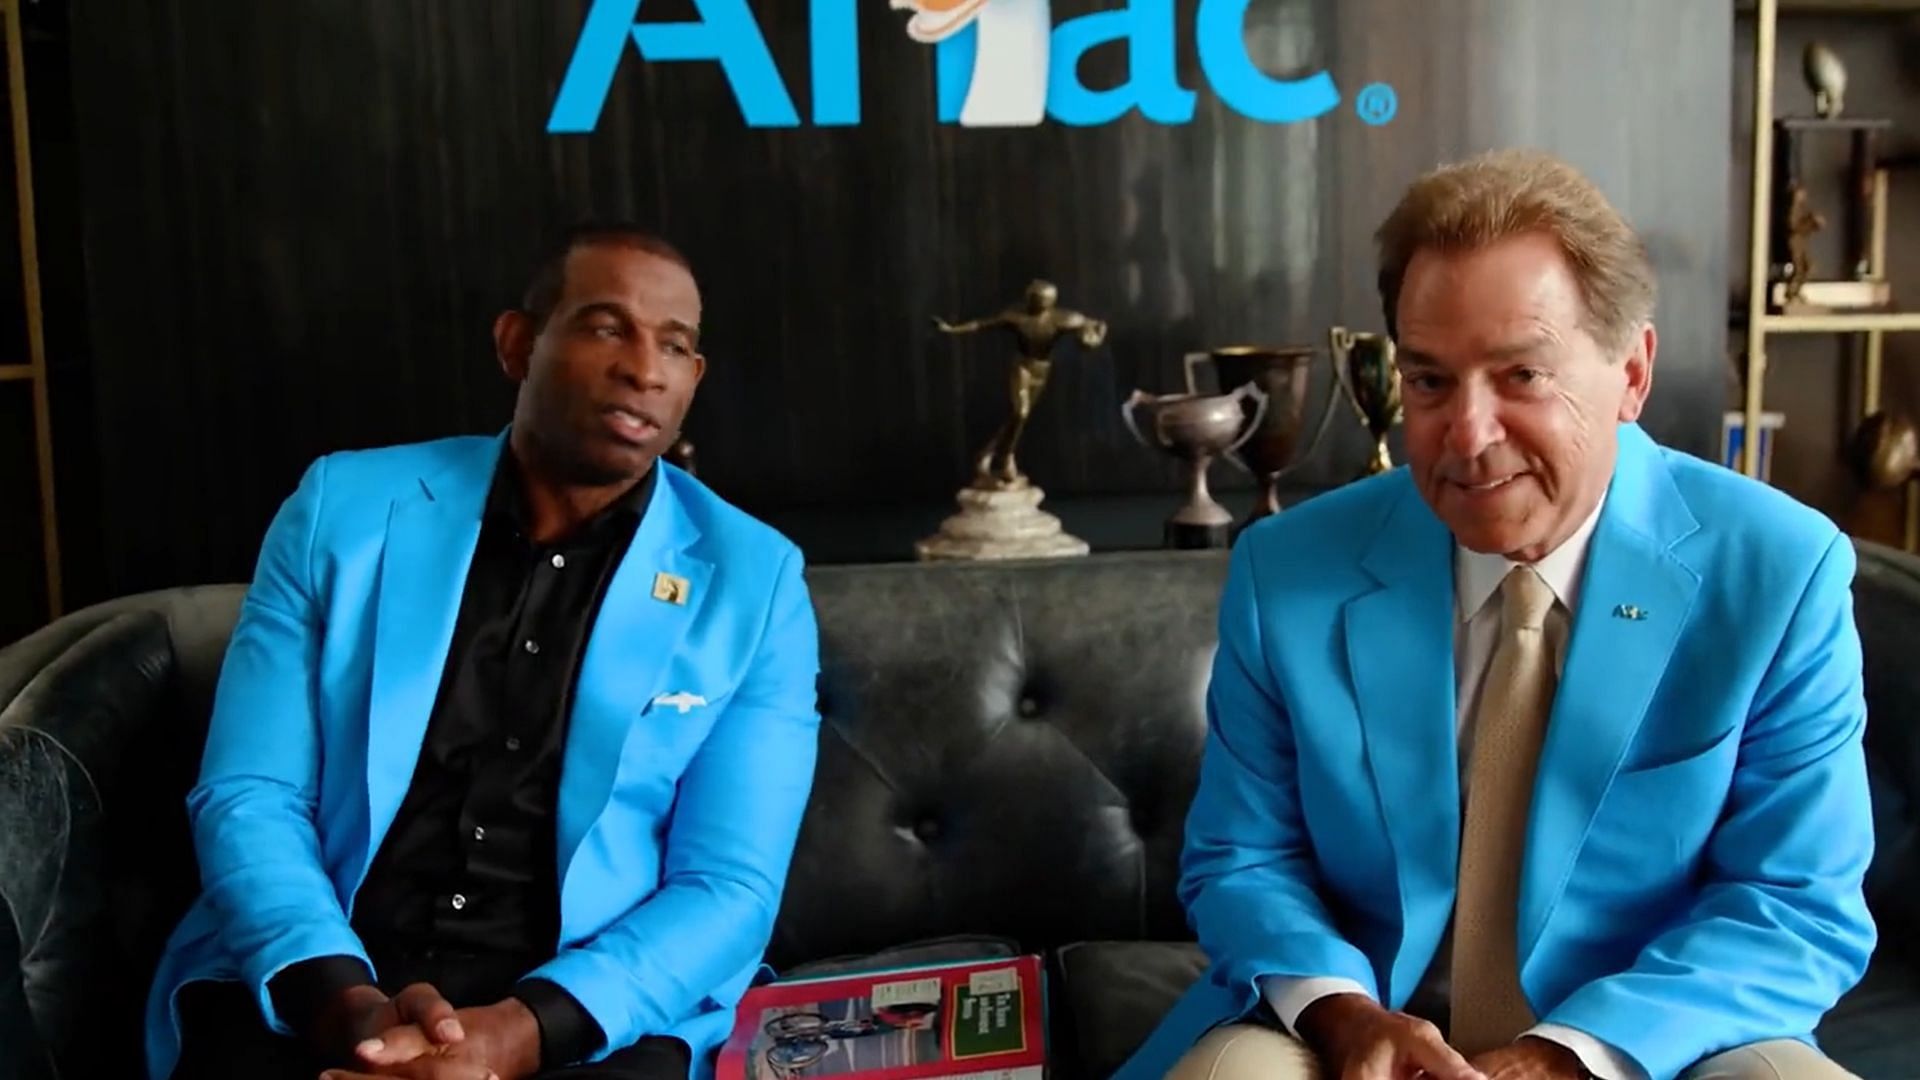 Watch Deion Sanders and Nick Saban squash beef over NIL deals to work